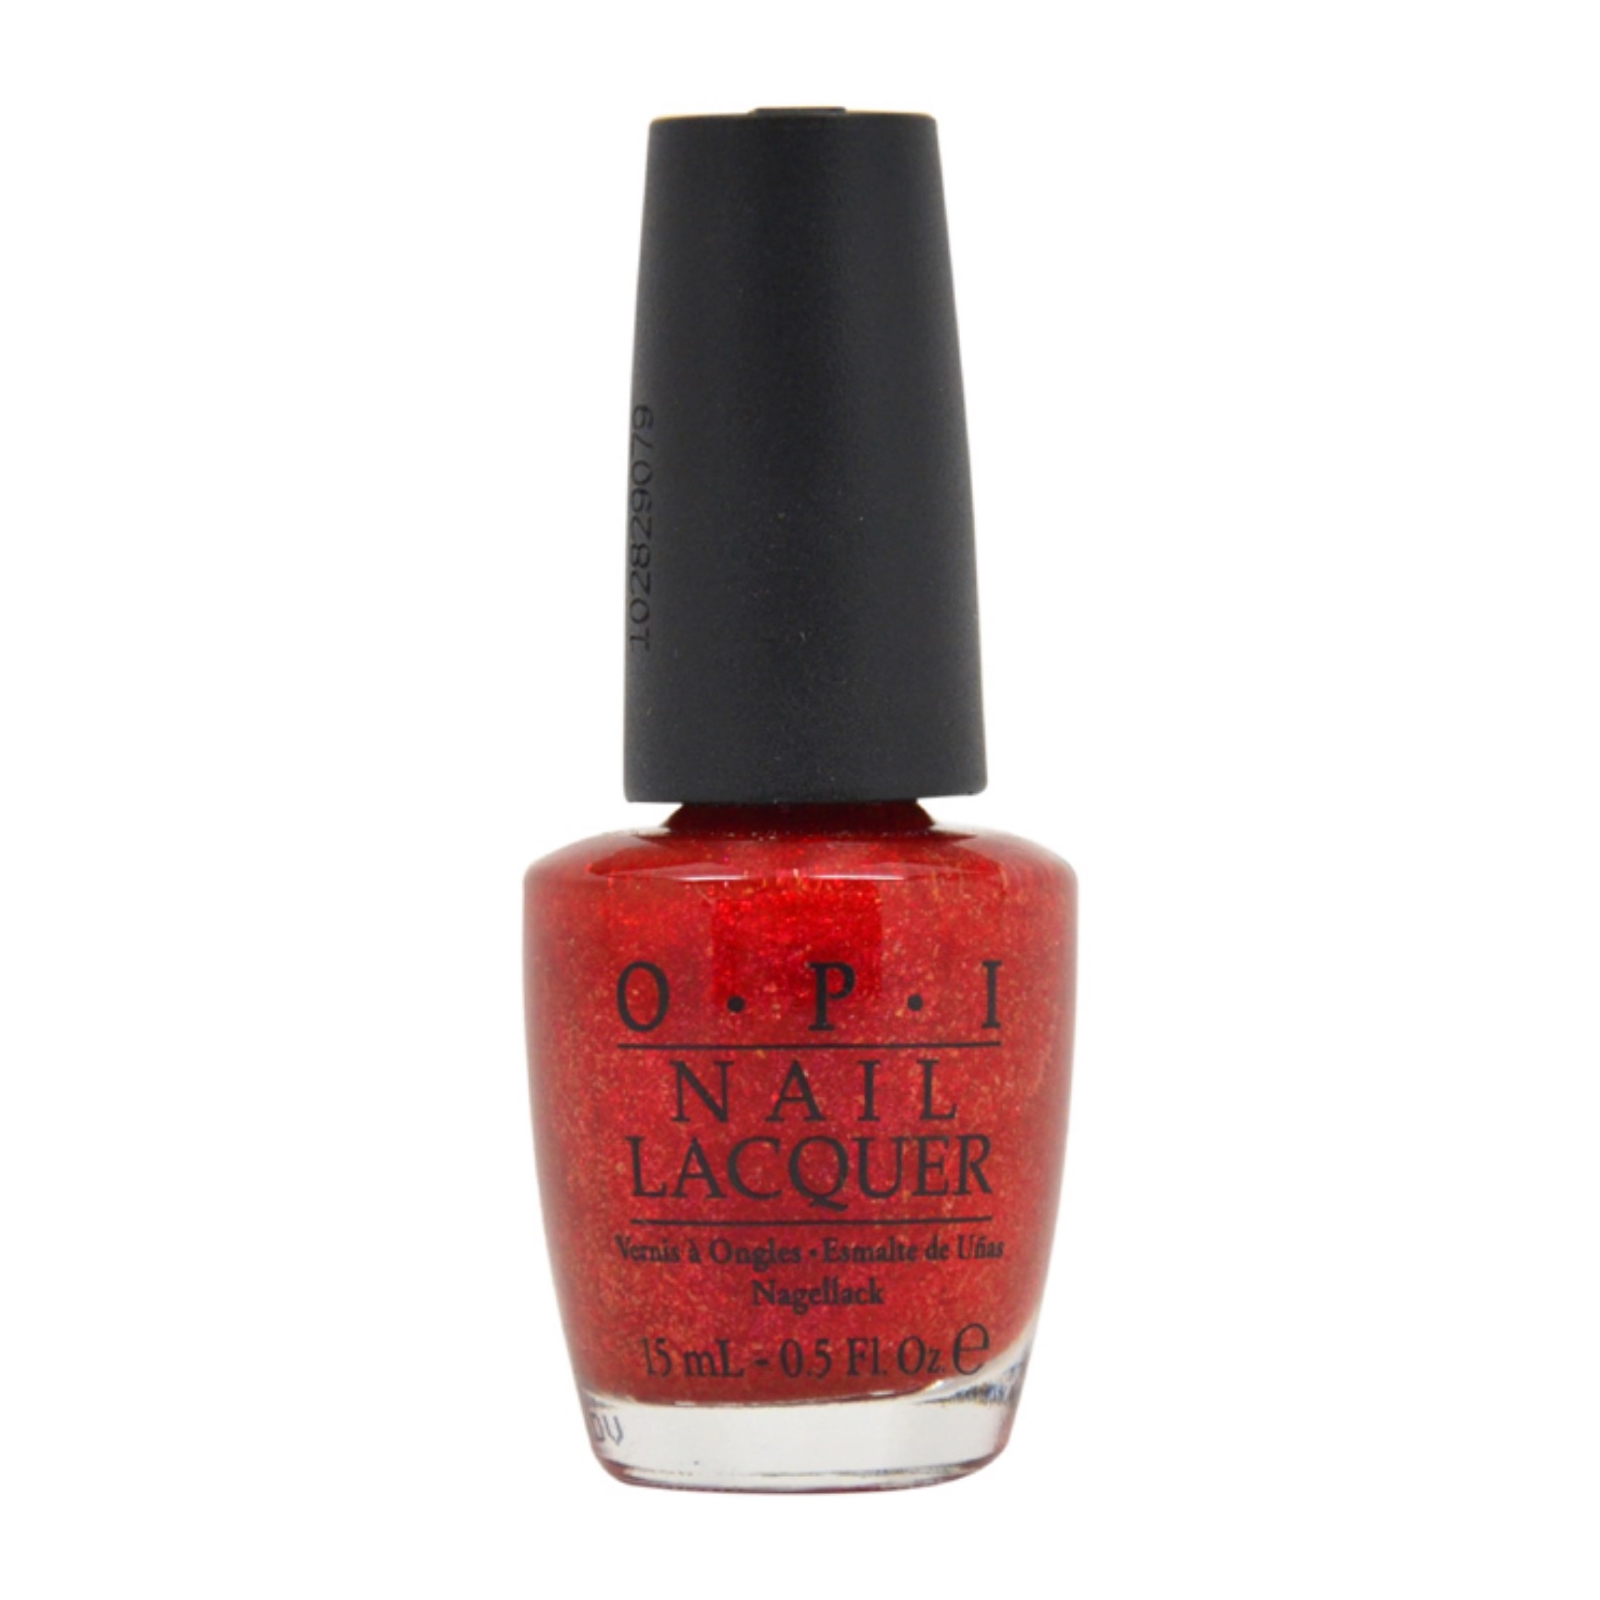 Nail Lacquer - # HL C04 Meep-Meep-Meep by OPI for Women - 0.5 oz Nail Polish